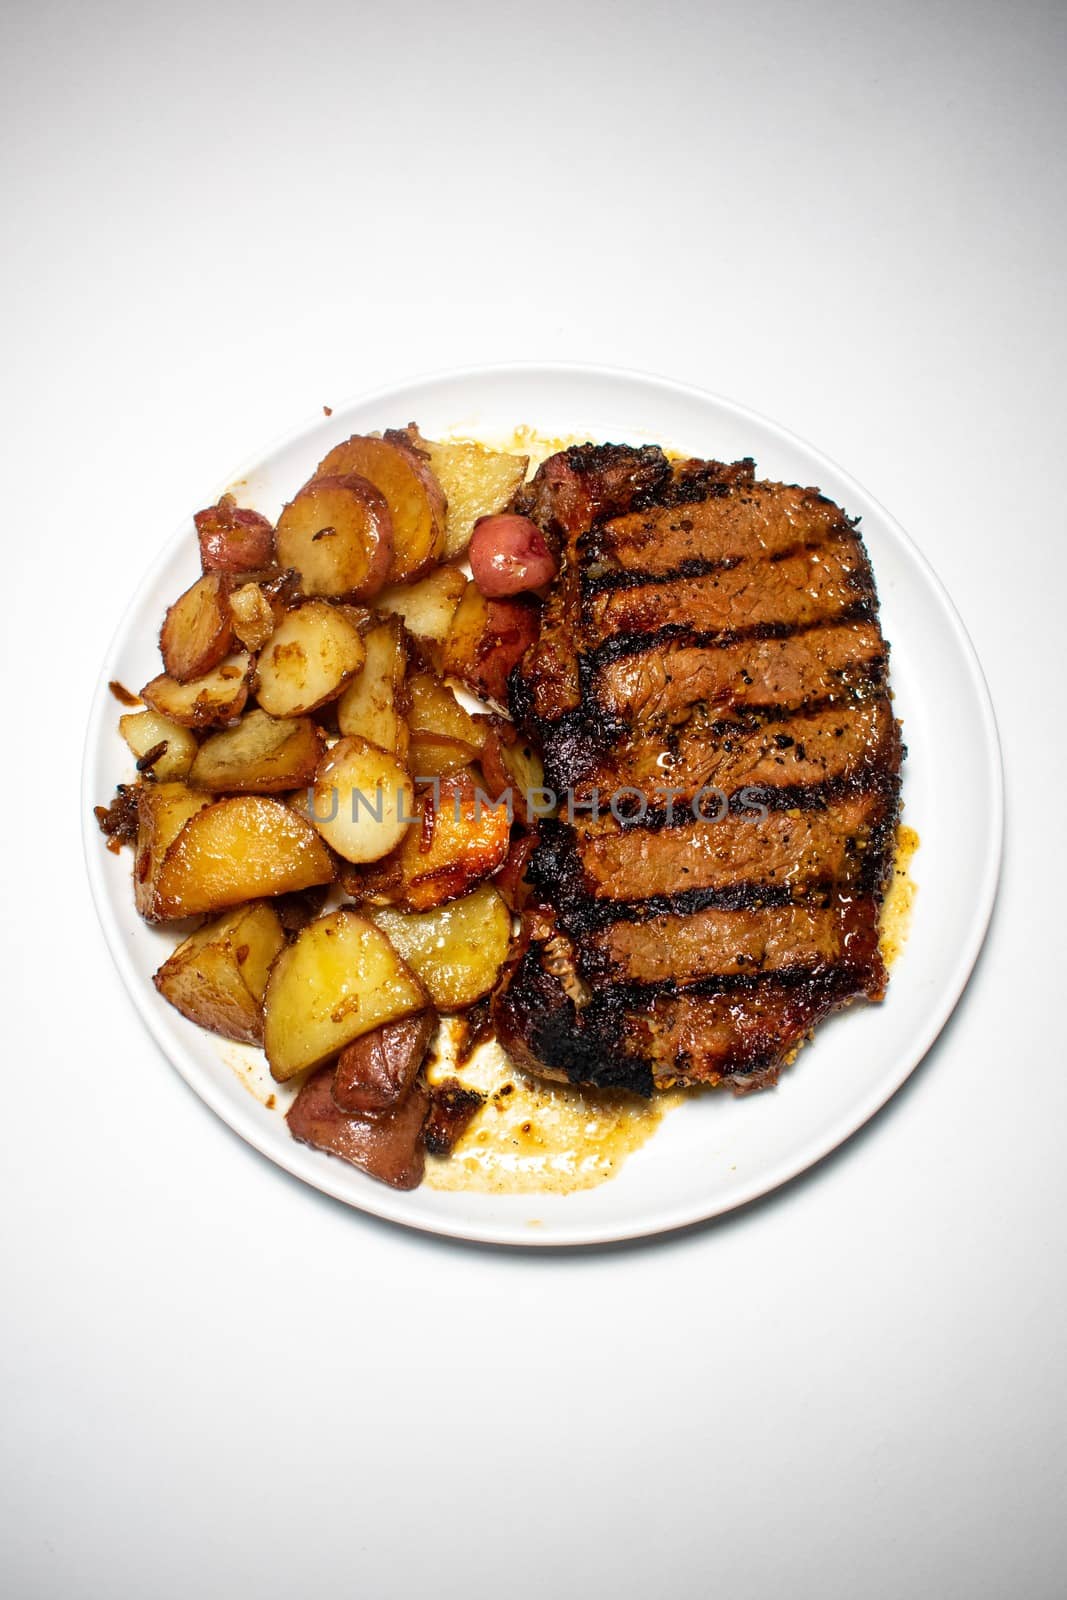 A Perfectly Grilled Steak With Black Grill Lines and Potatoes Plated on a Pure White Background